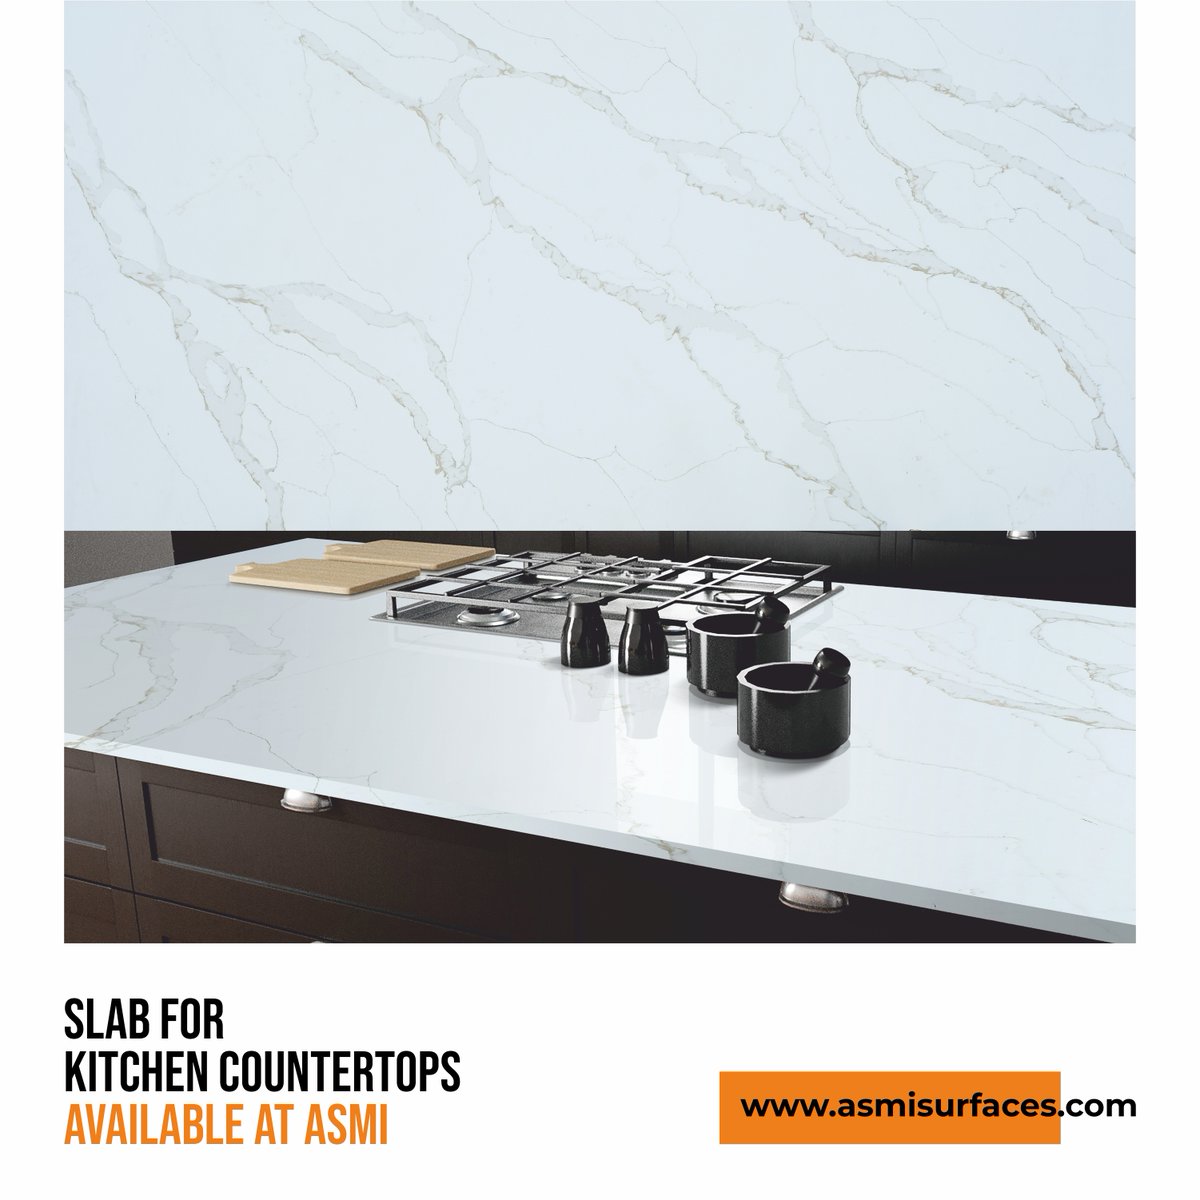 Featuring #calacata Toscano for #kitchencountertops by Asmi Surfaces. A perfect fusion of #Bookmatch style & functionality, calacatta toscano lends your #kitchen a clean and modern look that you'll love!
#asmisurfaces #countertop #kitchencountertop #architecture #quartz #kansas